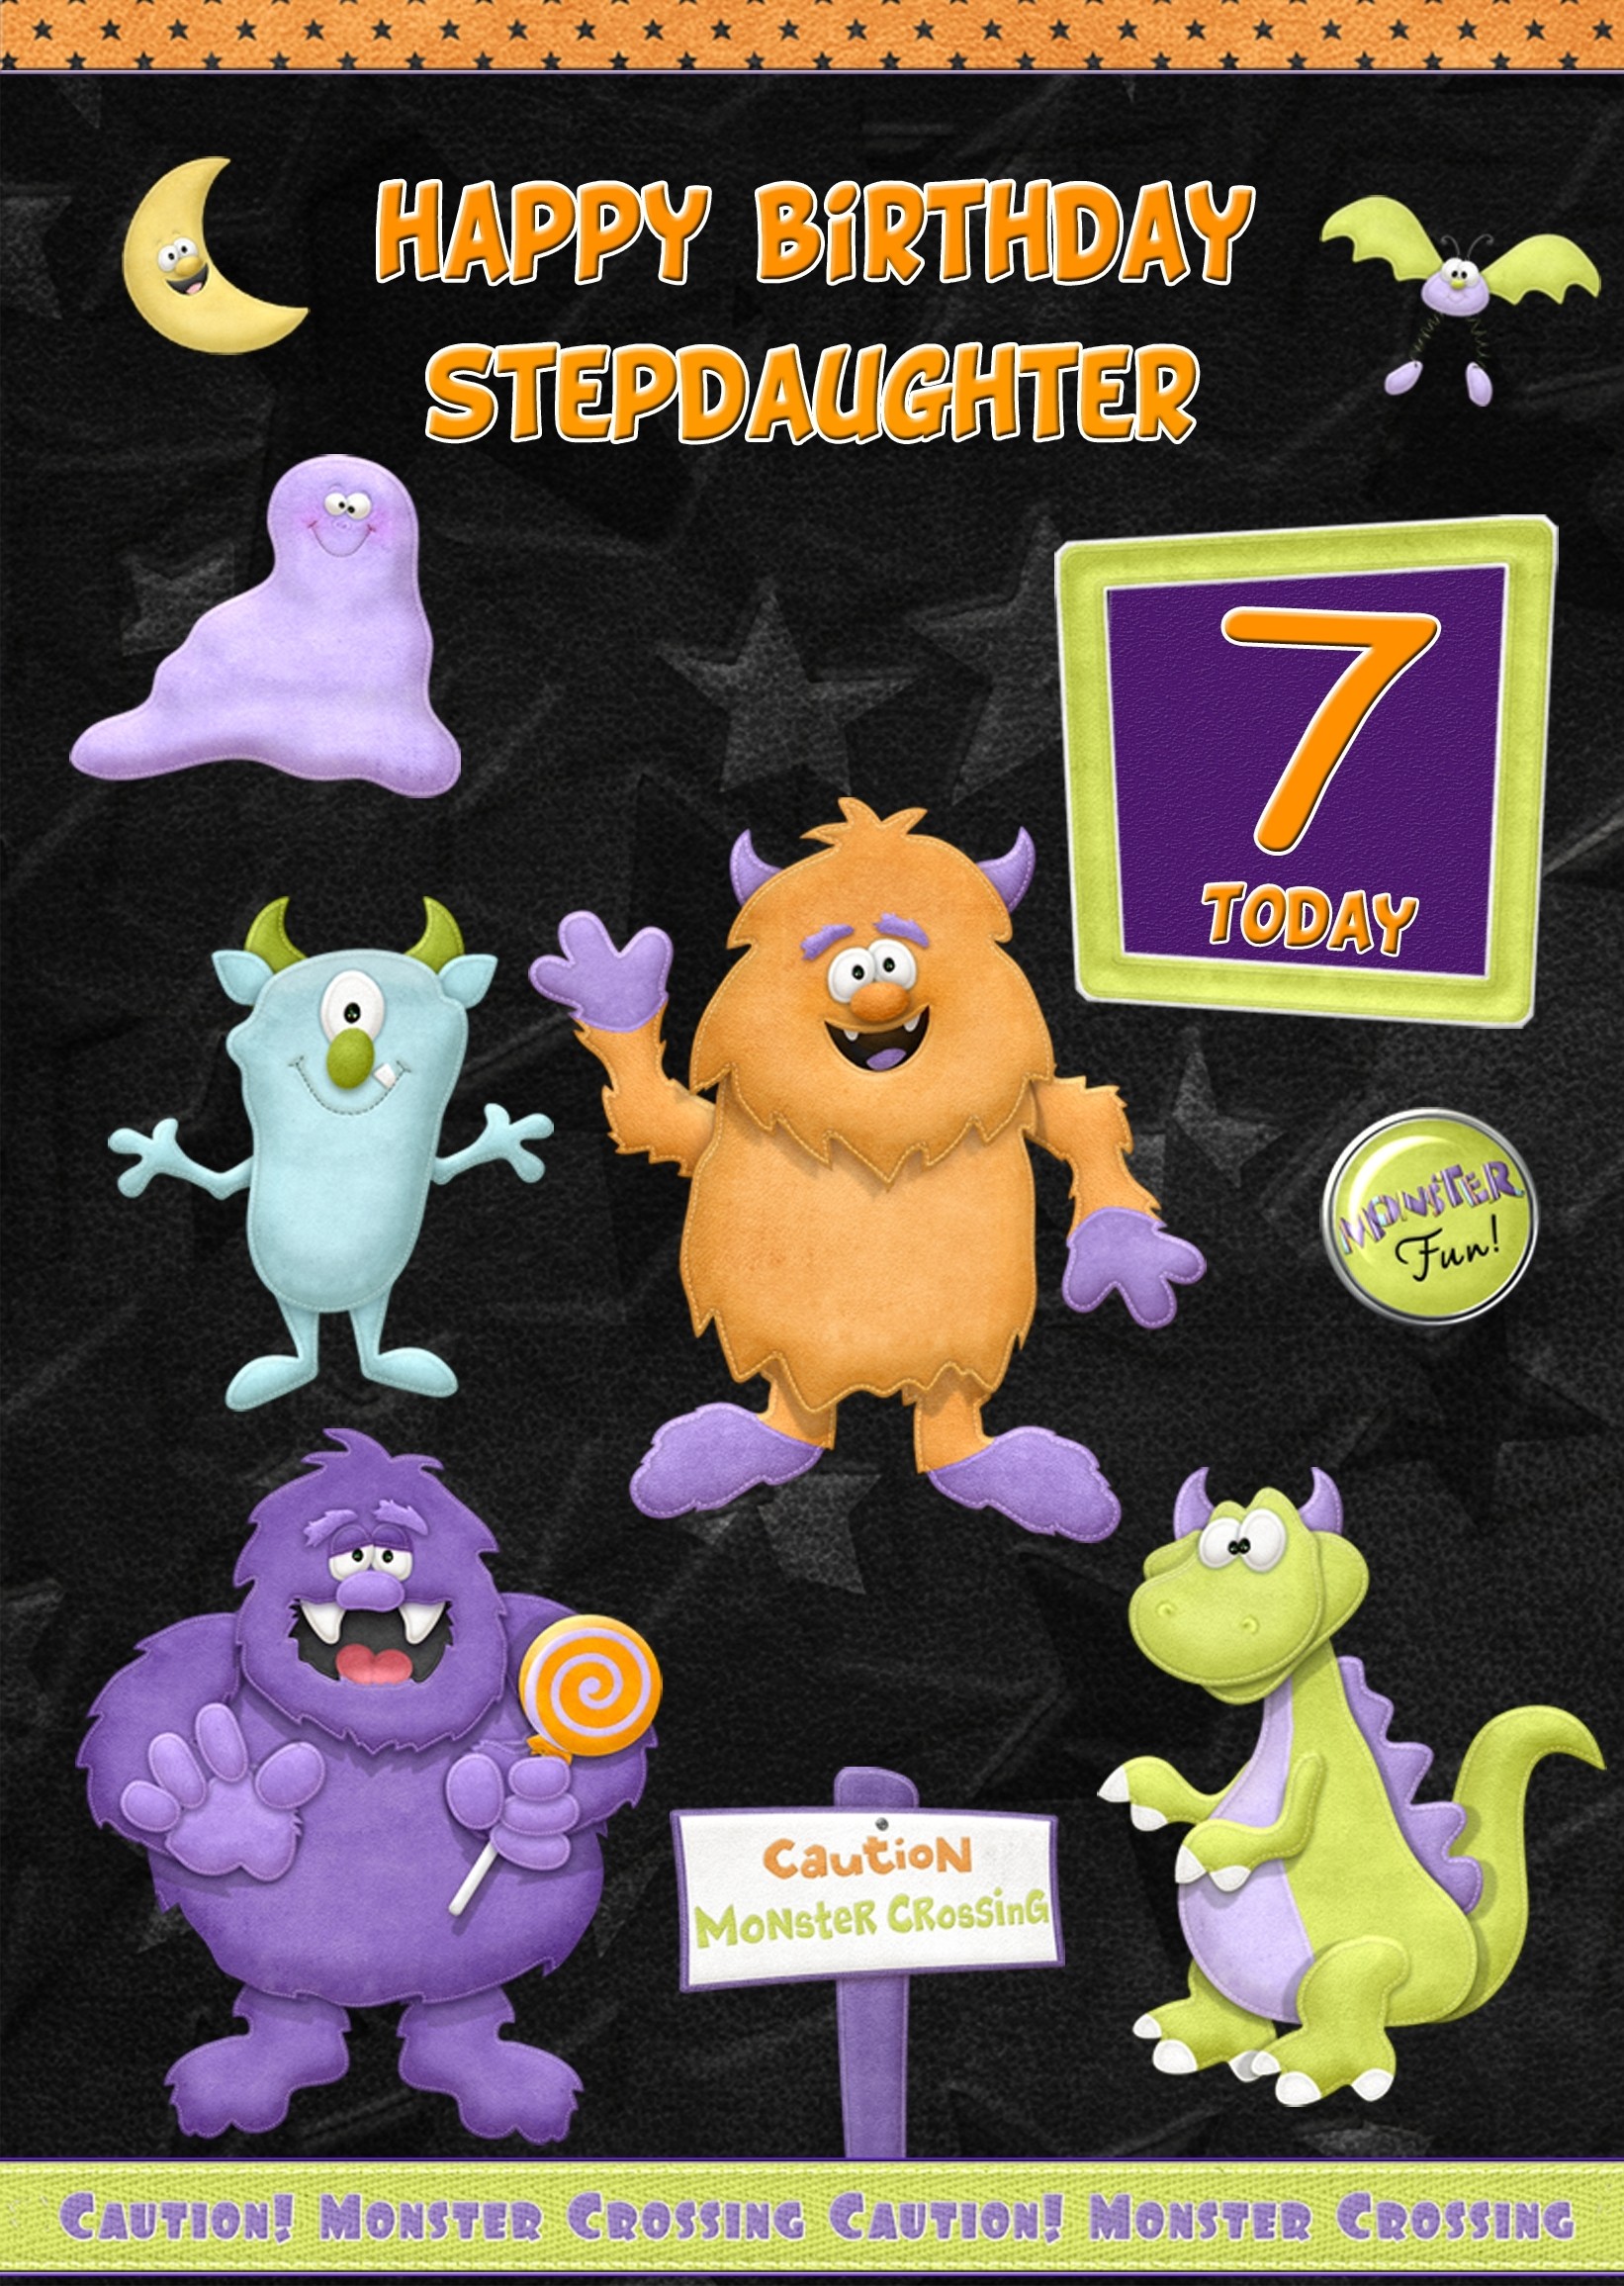 Kids 7th Birthday Funny Monster Cartoon Card for Stepdaughter